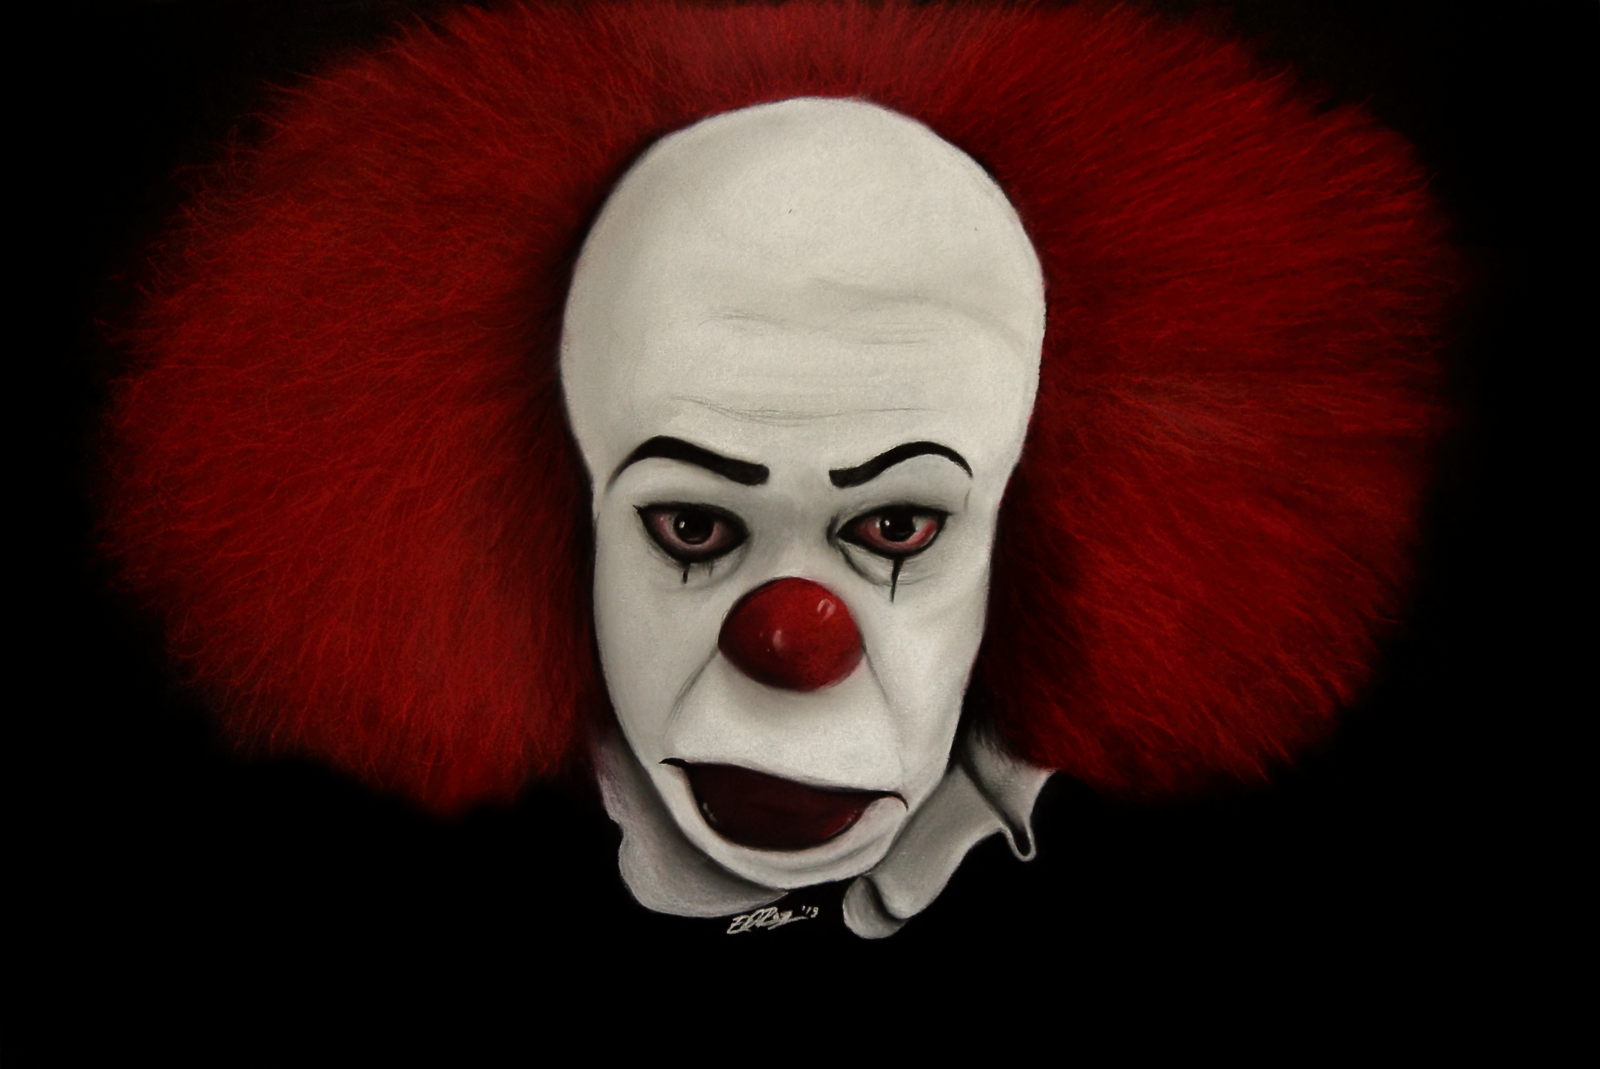 Pennywise The Clown Wallpaper / Pennywise The Dancing Clown Wallpapers - Wallpaper Cave